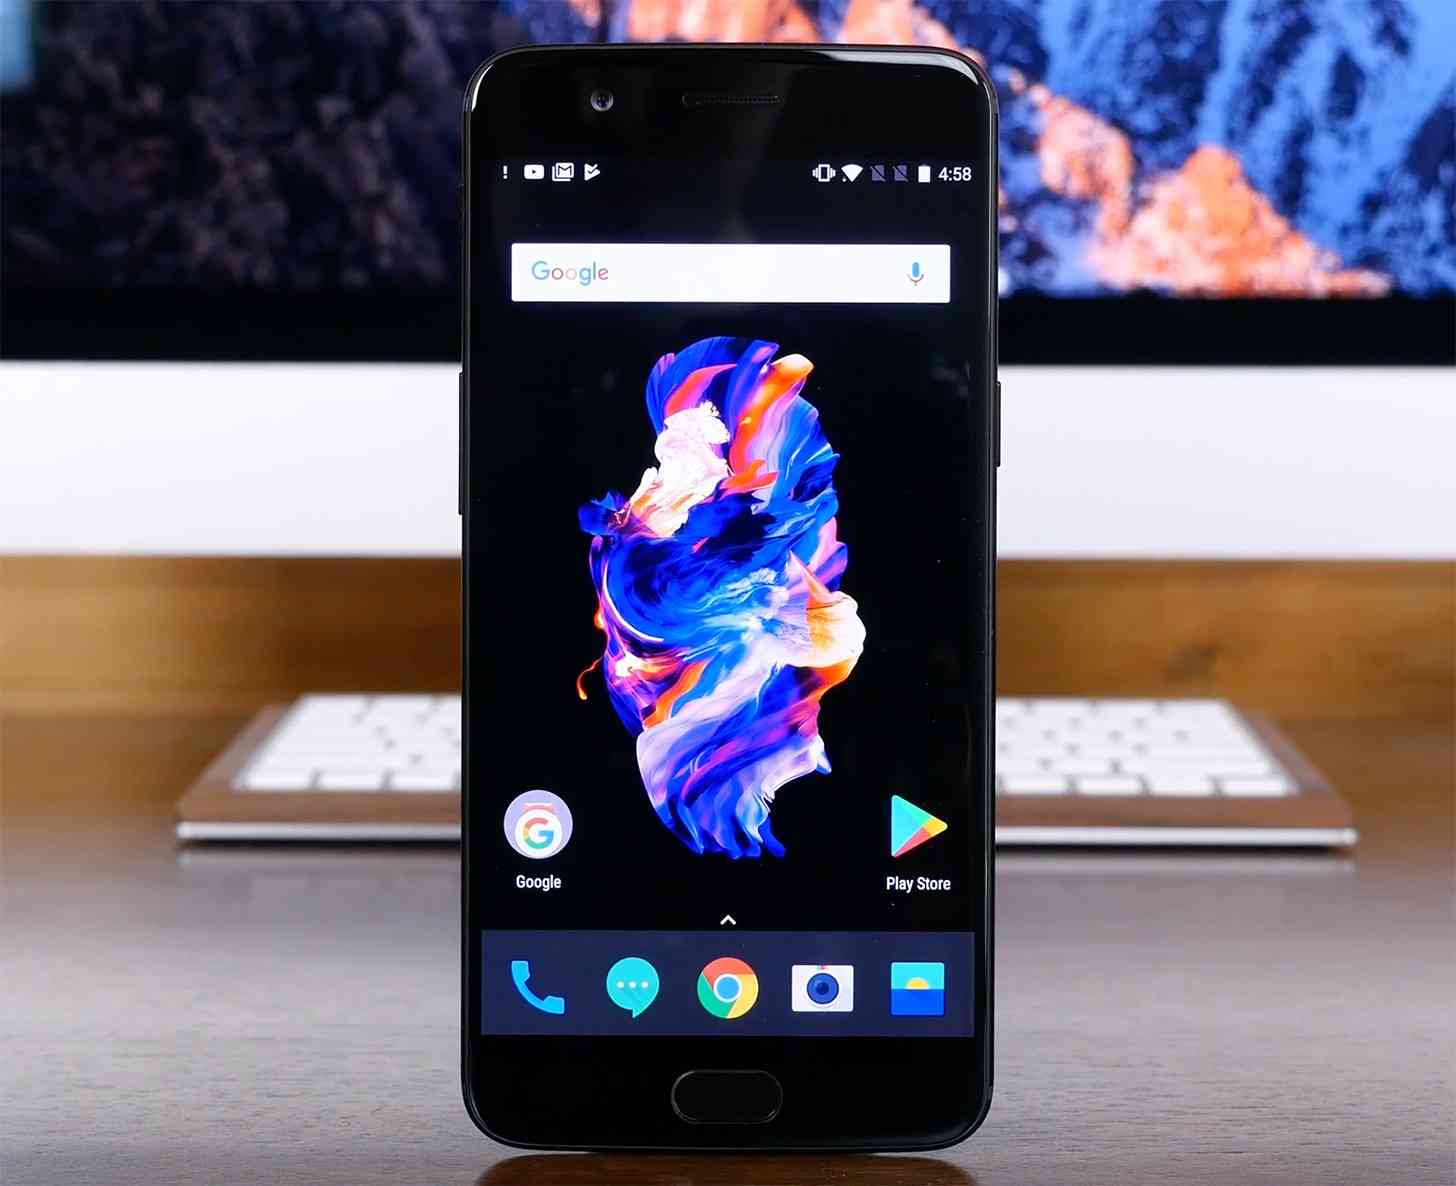 OnePlus 5 hands-on video review